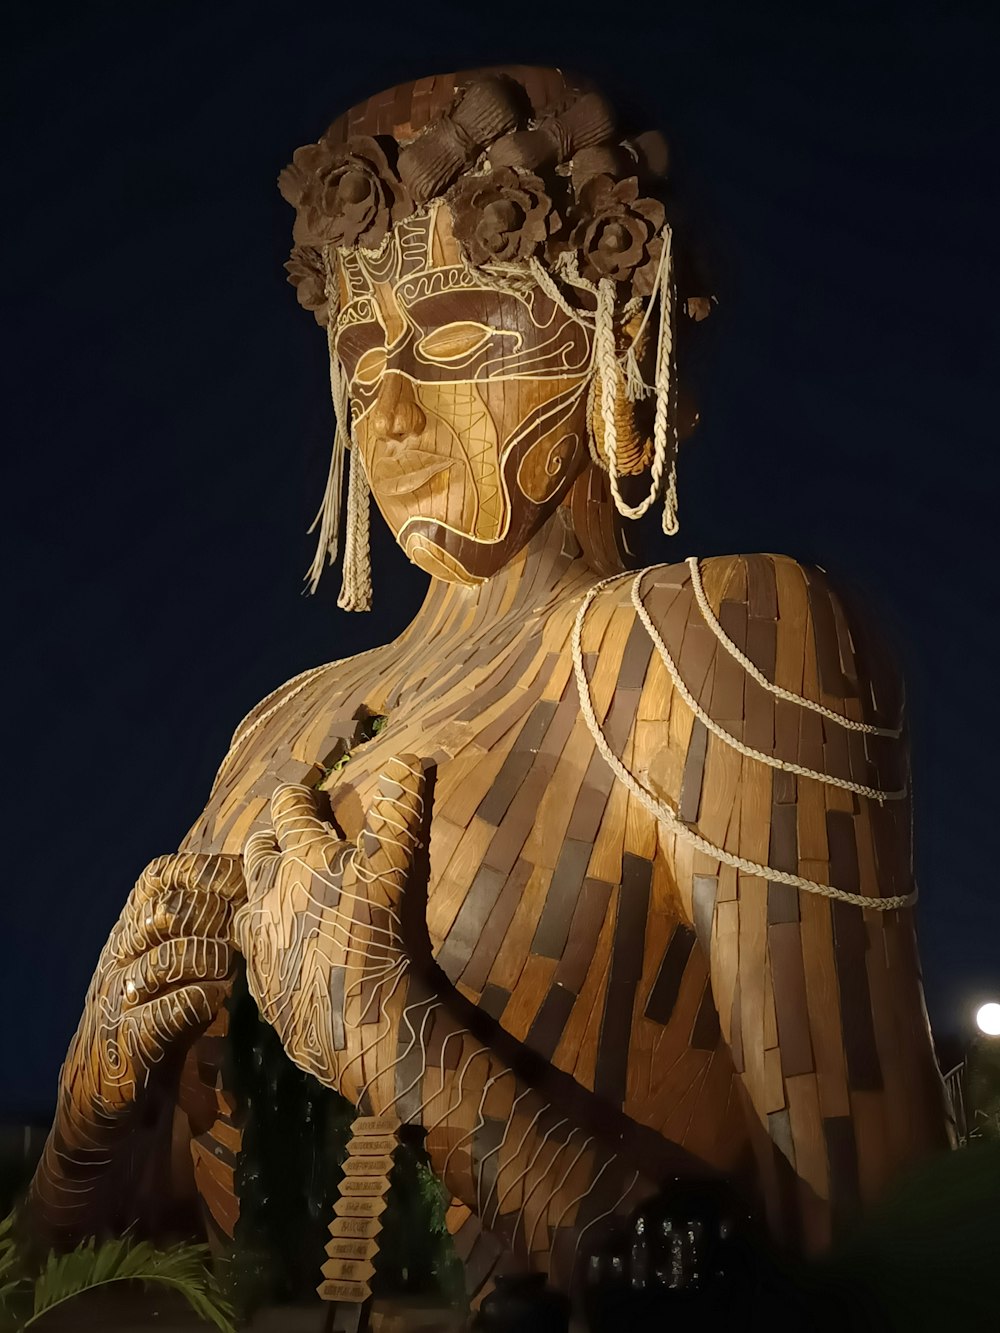 a large wooden statue of a woman with flowers on her head